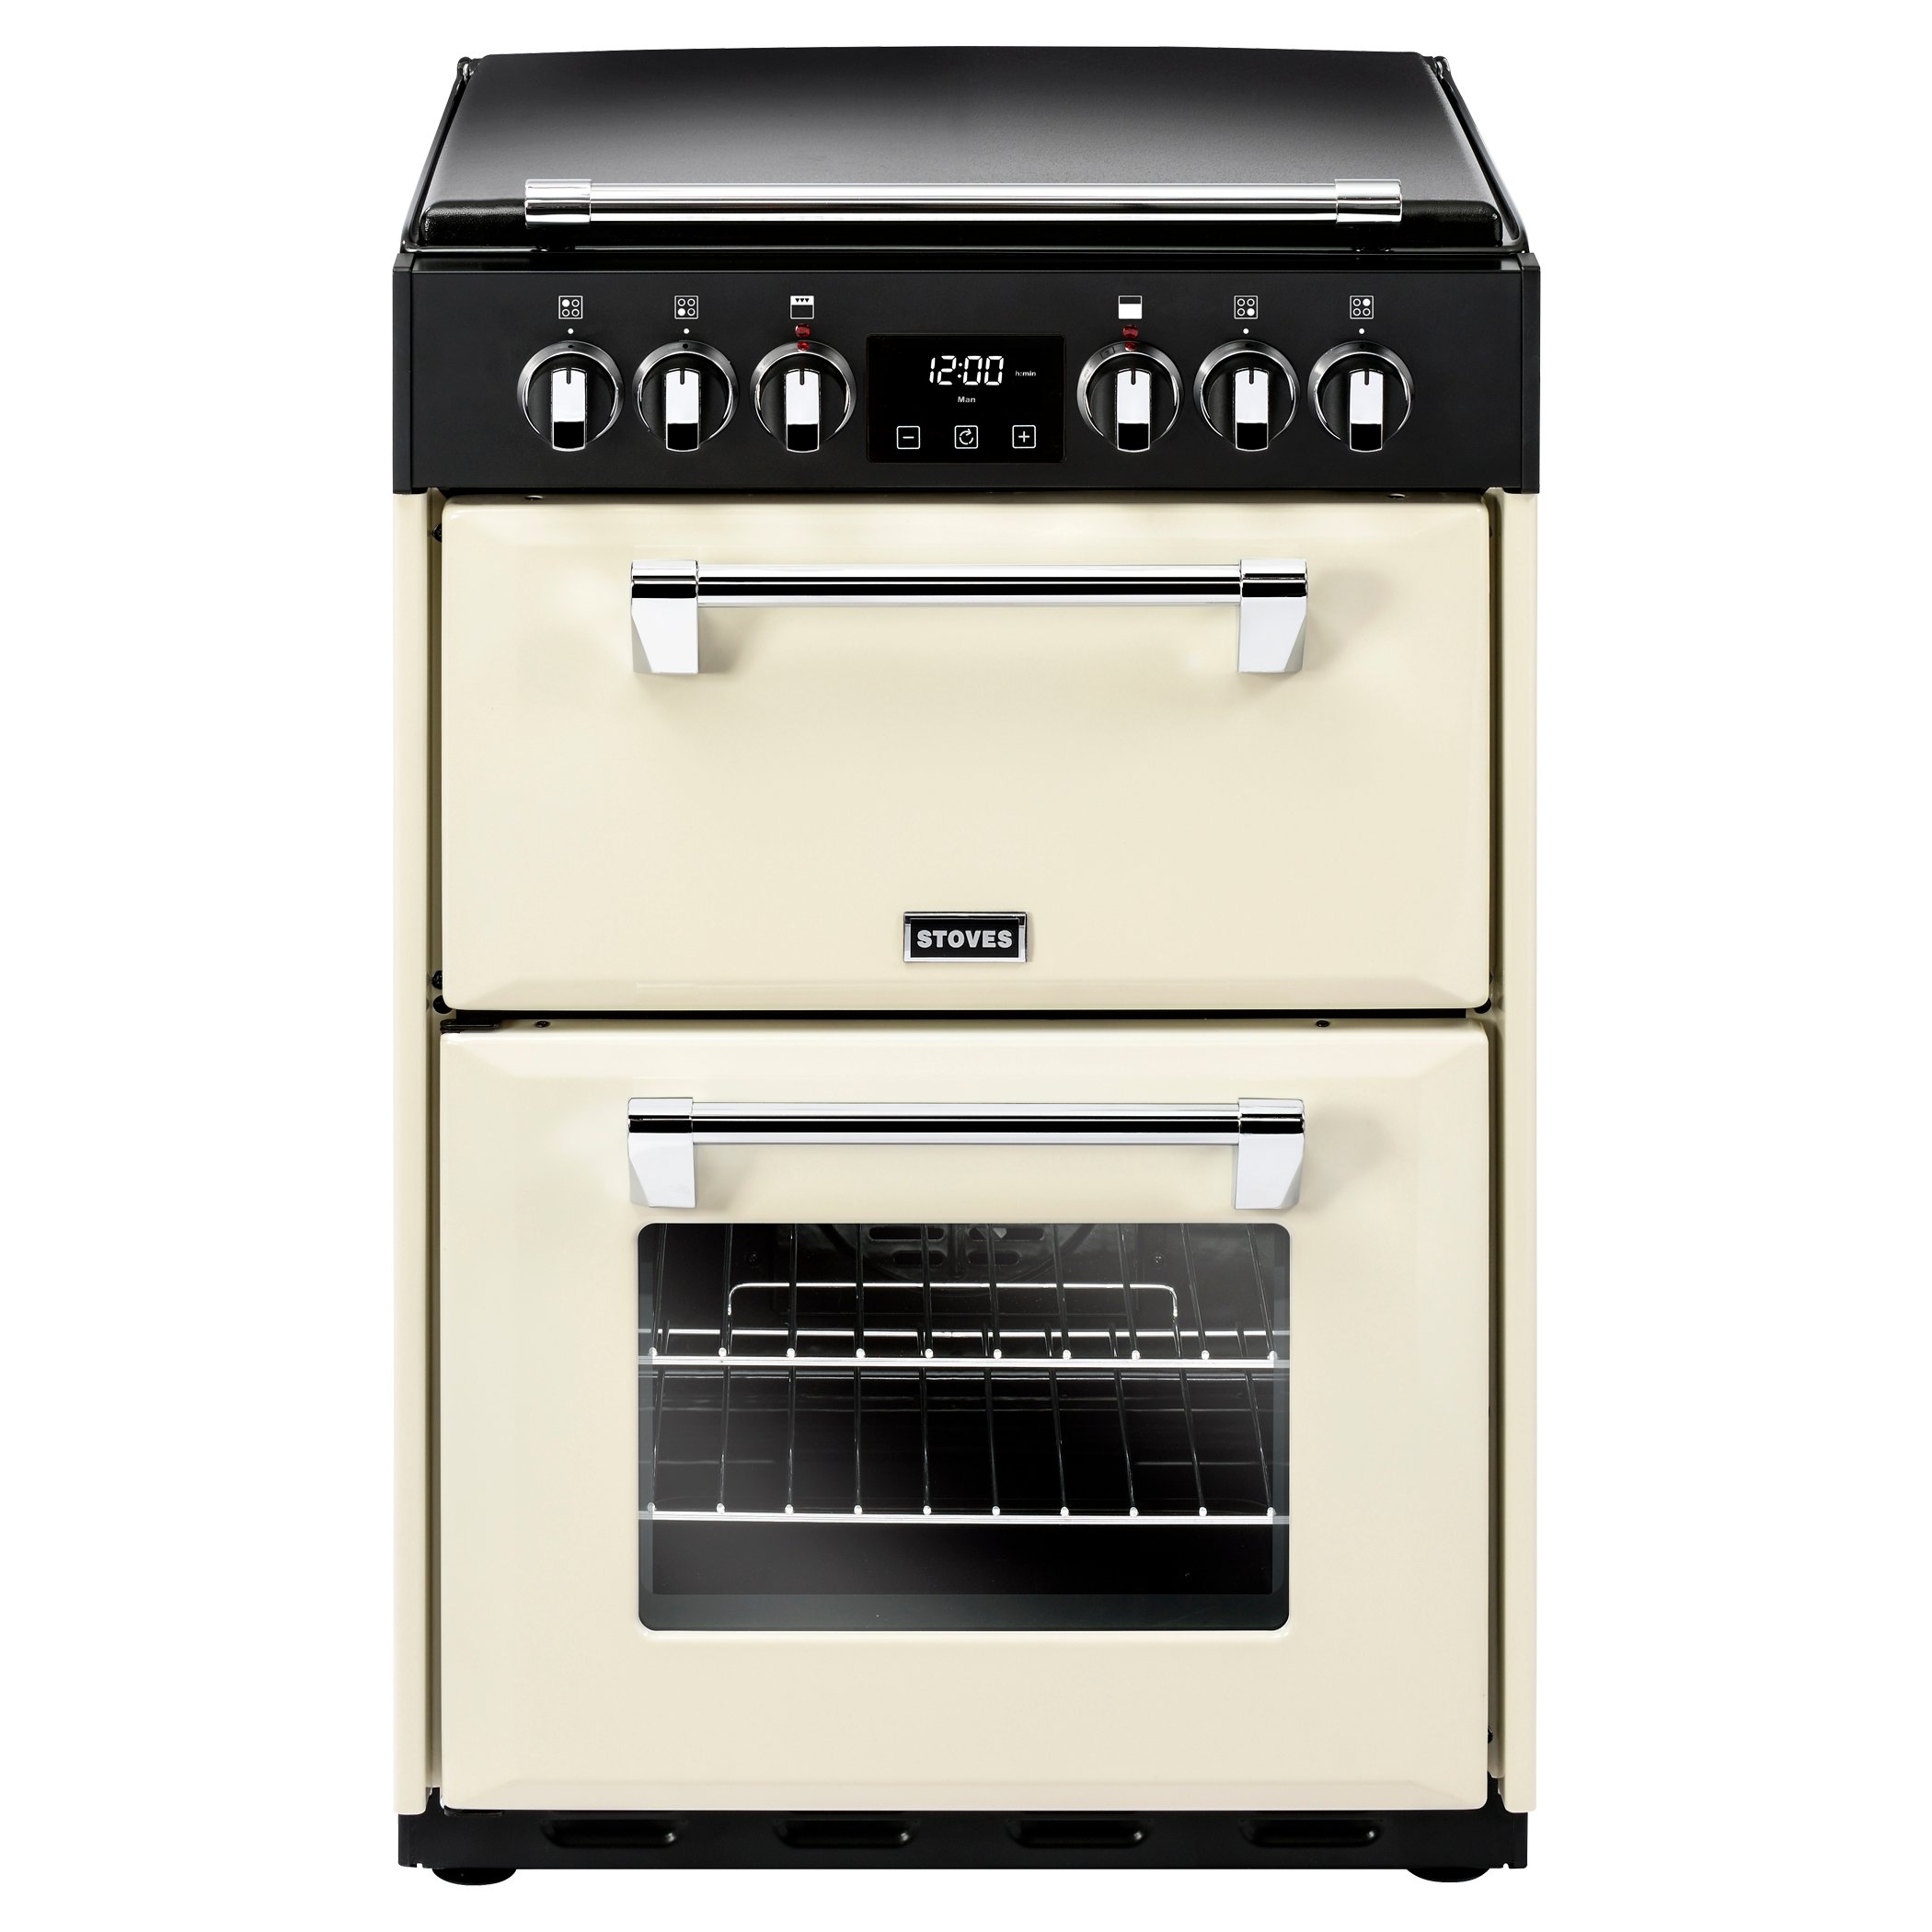 60cm Electric Range Cooker With Cast Aluminium Lid, 4 Zone Electric Ceramic Hob, Conventional Oven & Grill and Fanned Main Oven